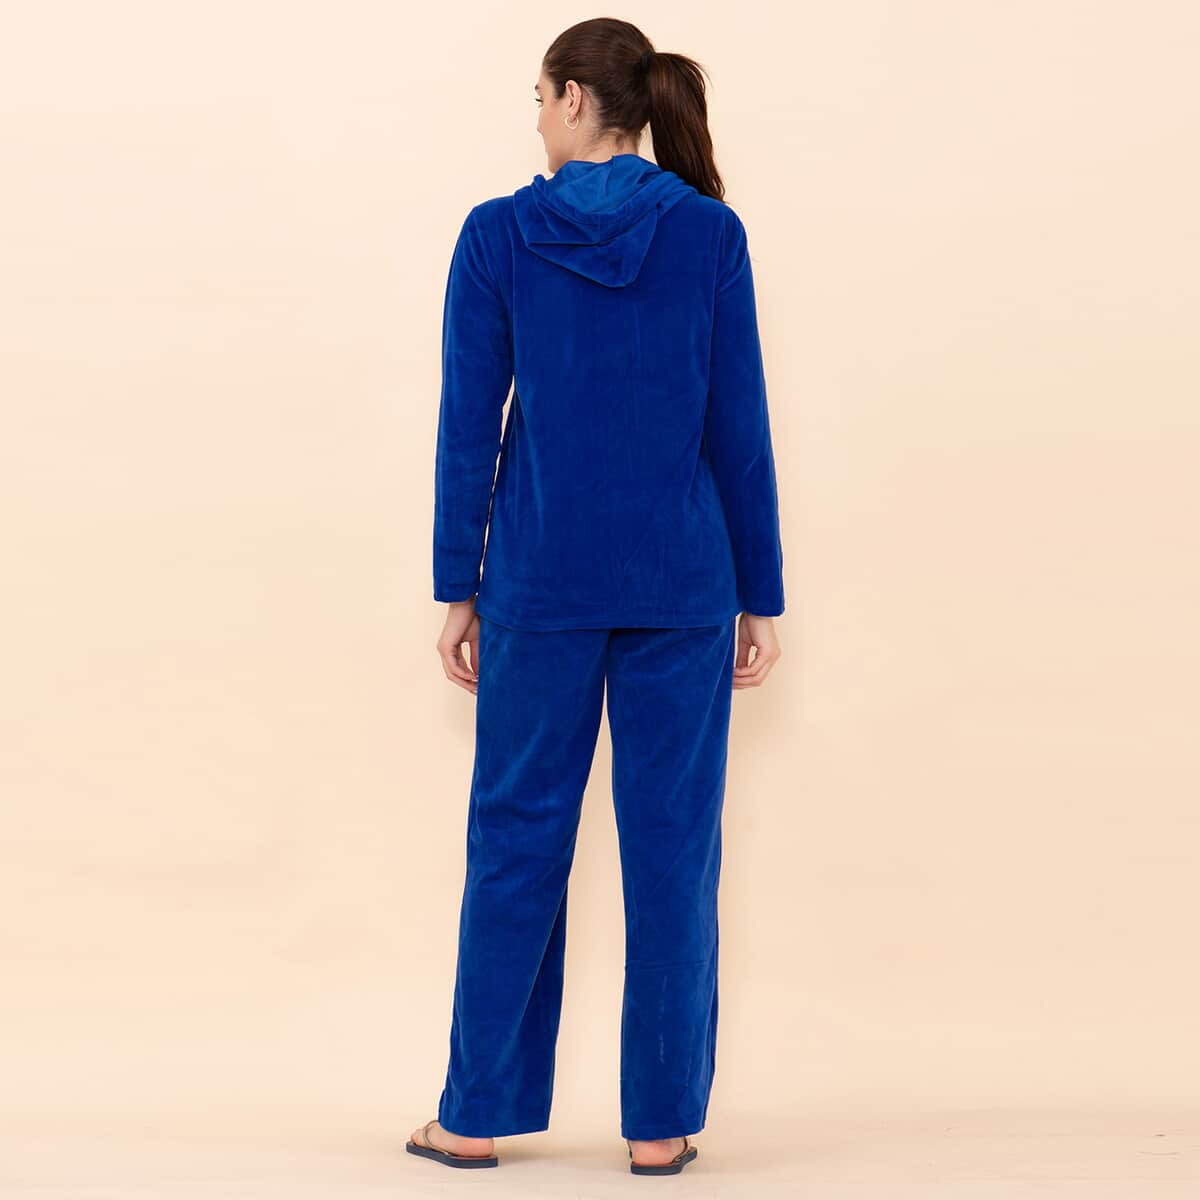 TAMSY LUX Blue Velour Track Suit Set - S image number 1